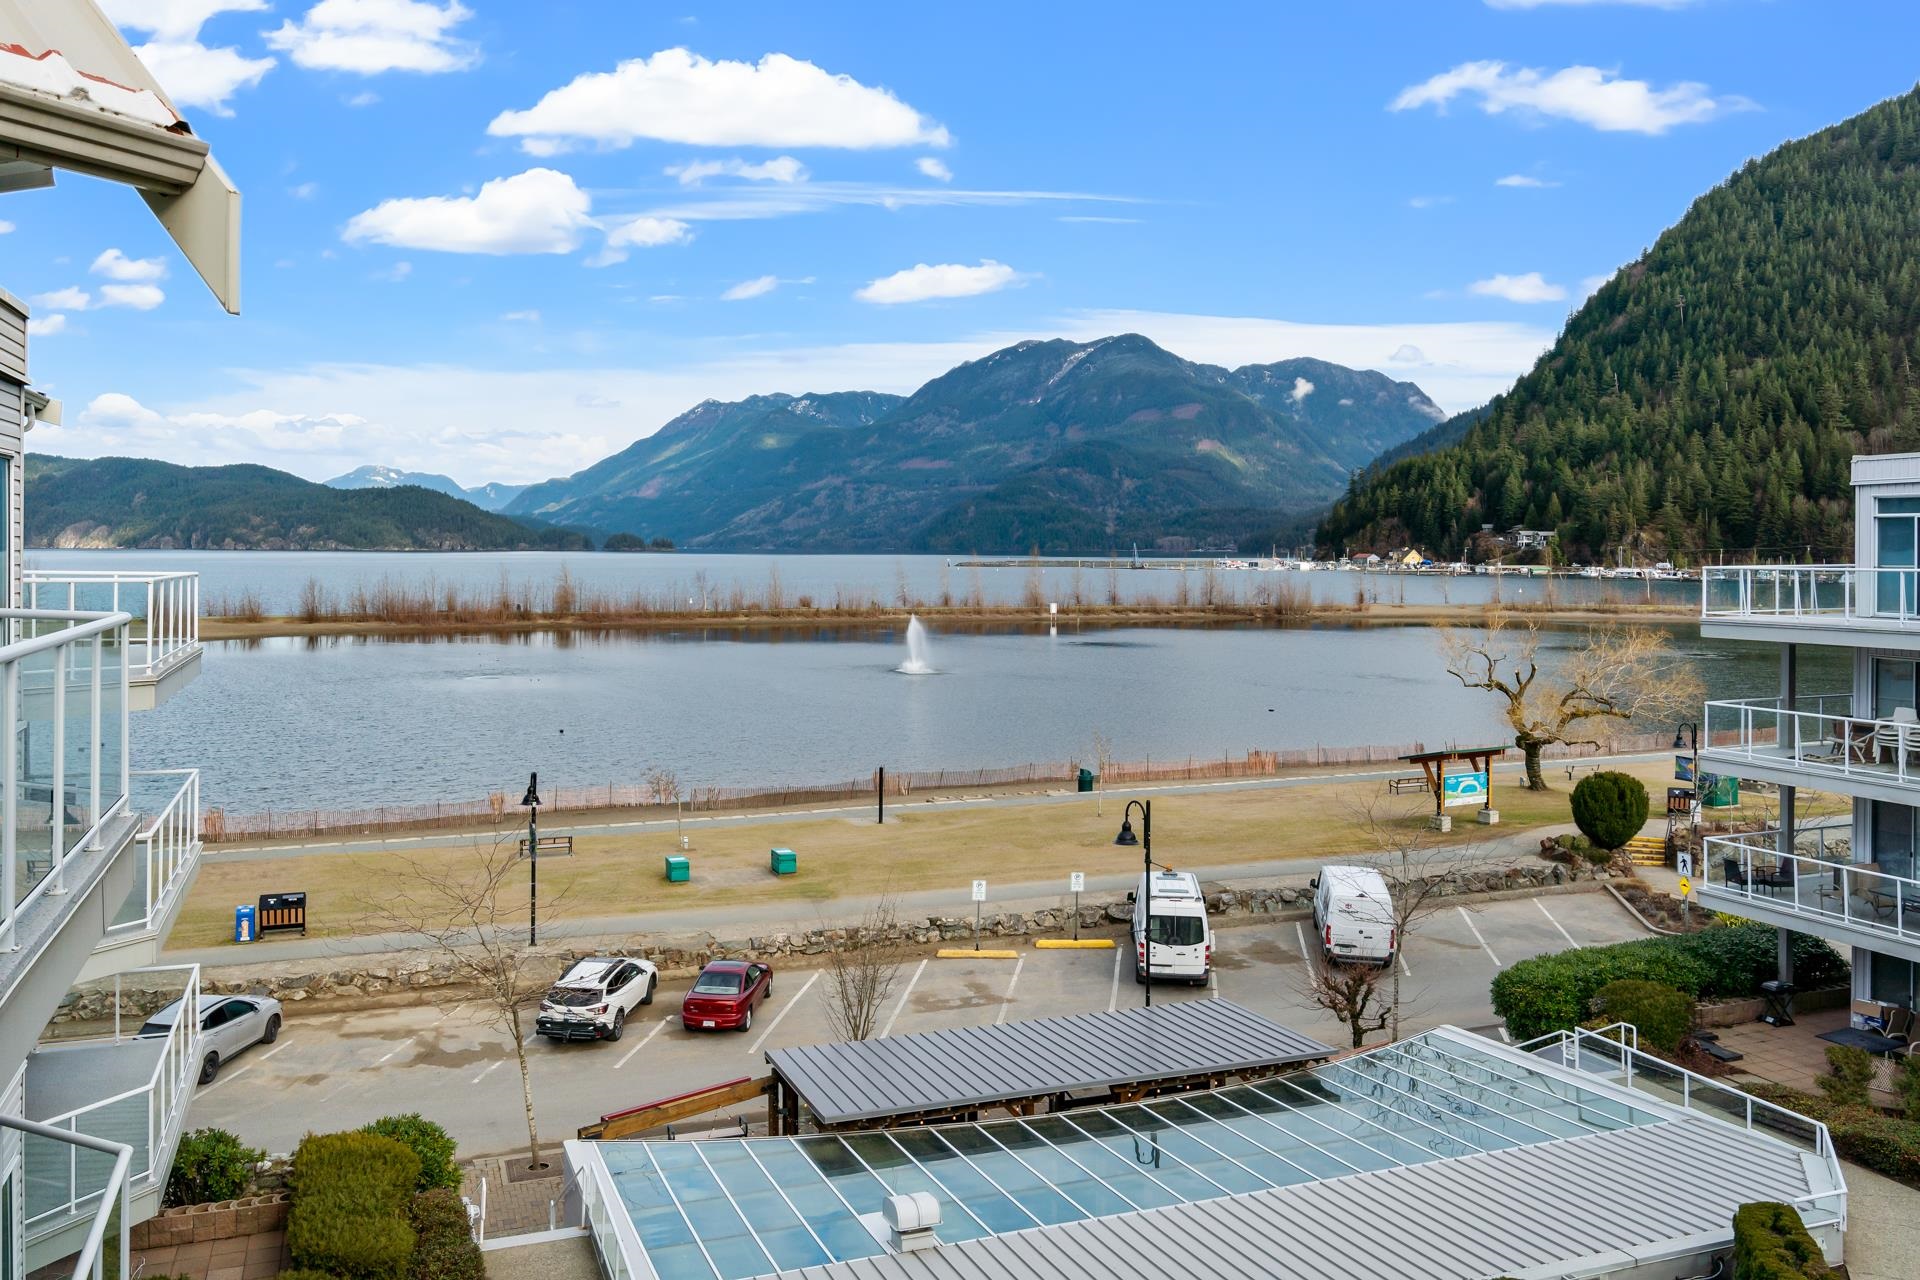 Harrison Hot Springs Apartment/Condo for sale:  2 bedroom 1,044 sq.ft. (Listed 2106-02-06)